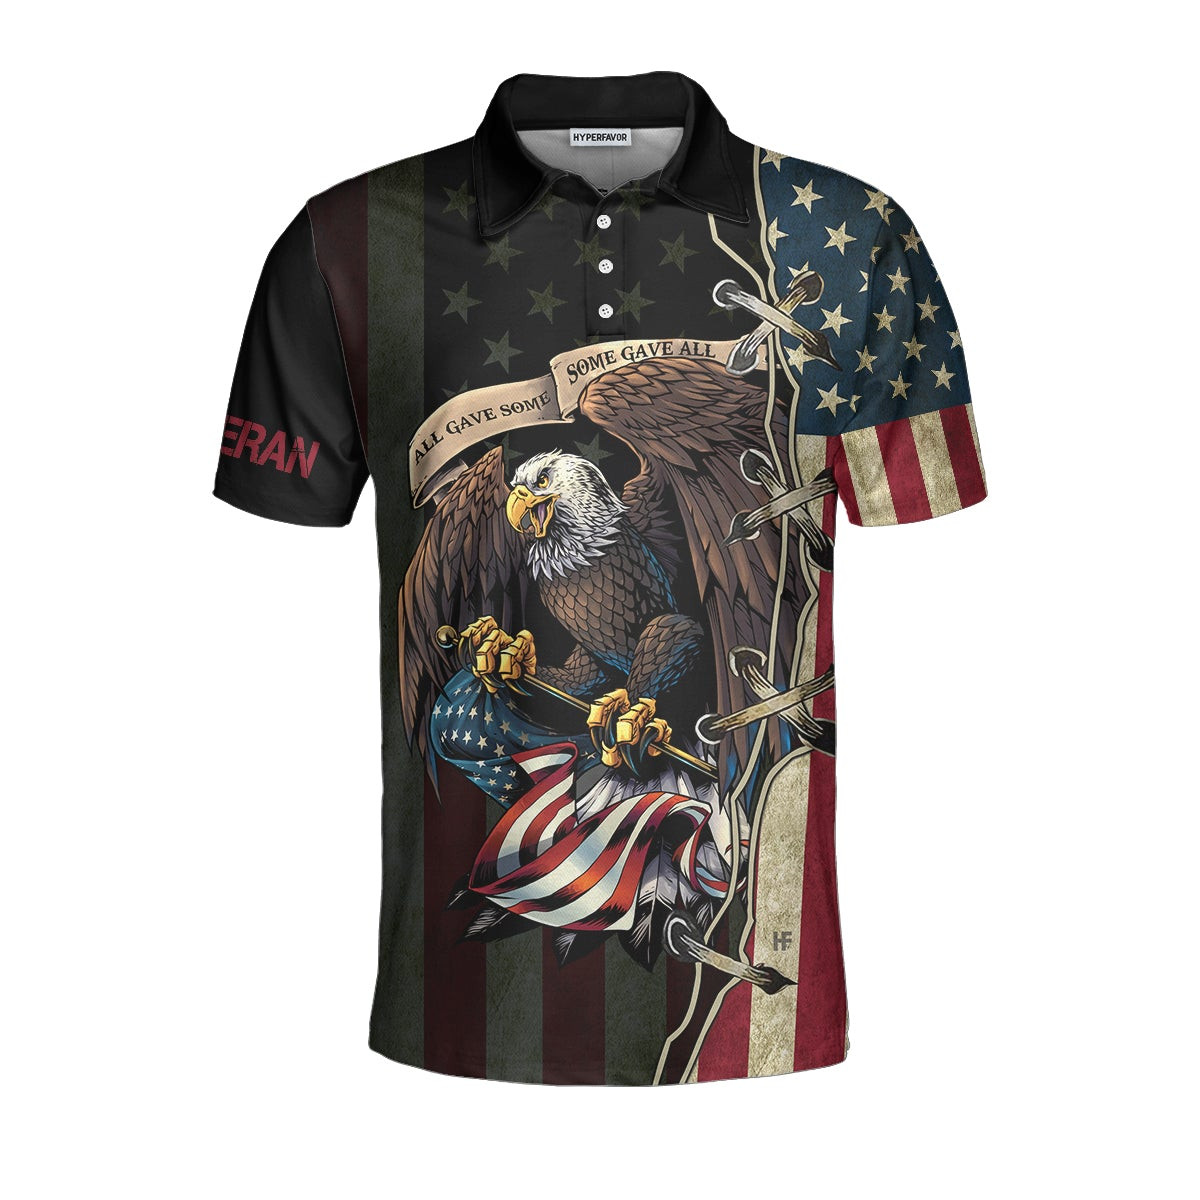 All Gave Some Some Gave All Veteran Polo Shirt American Bald Eagle Shirt Design Patriotic Shirt For Veterans